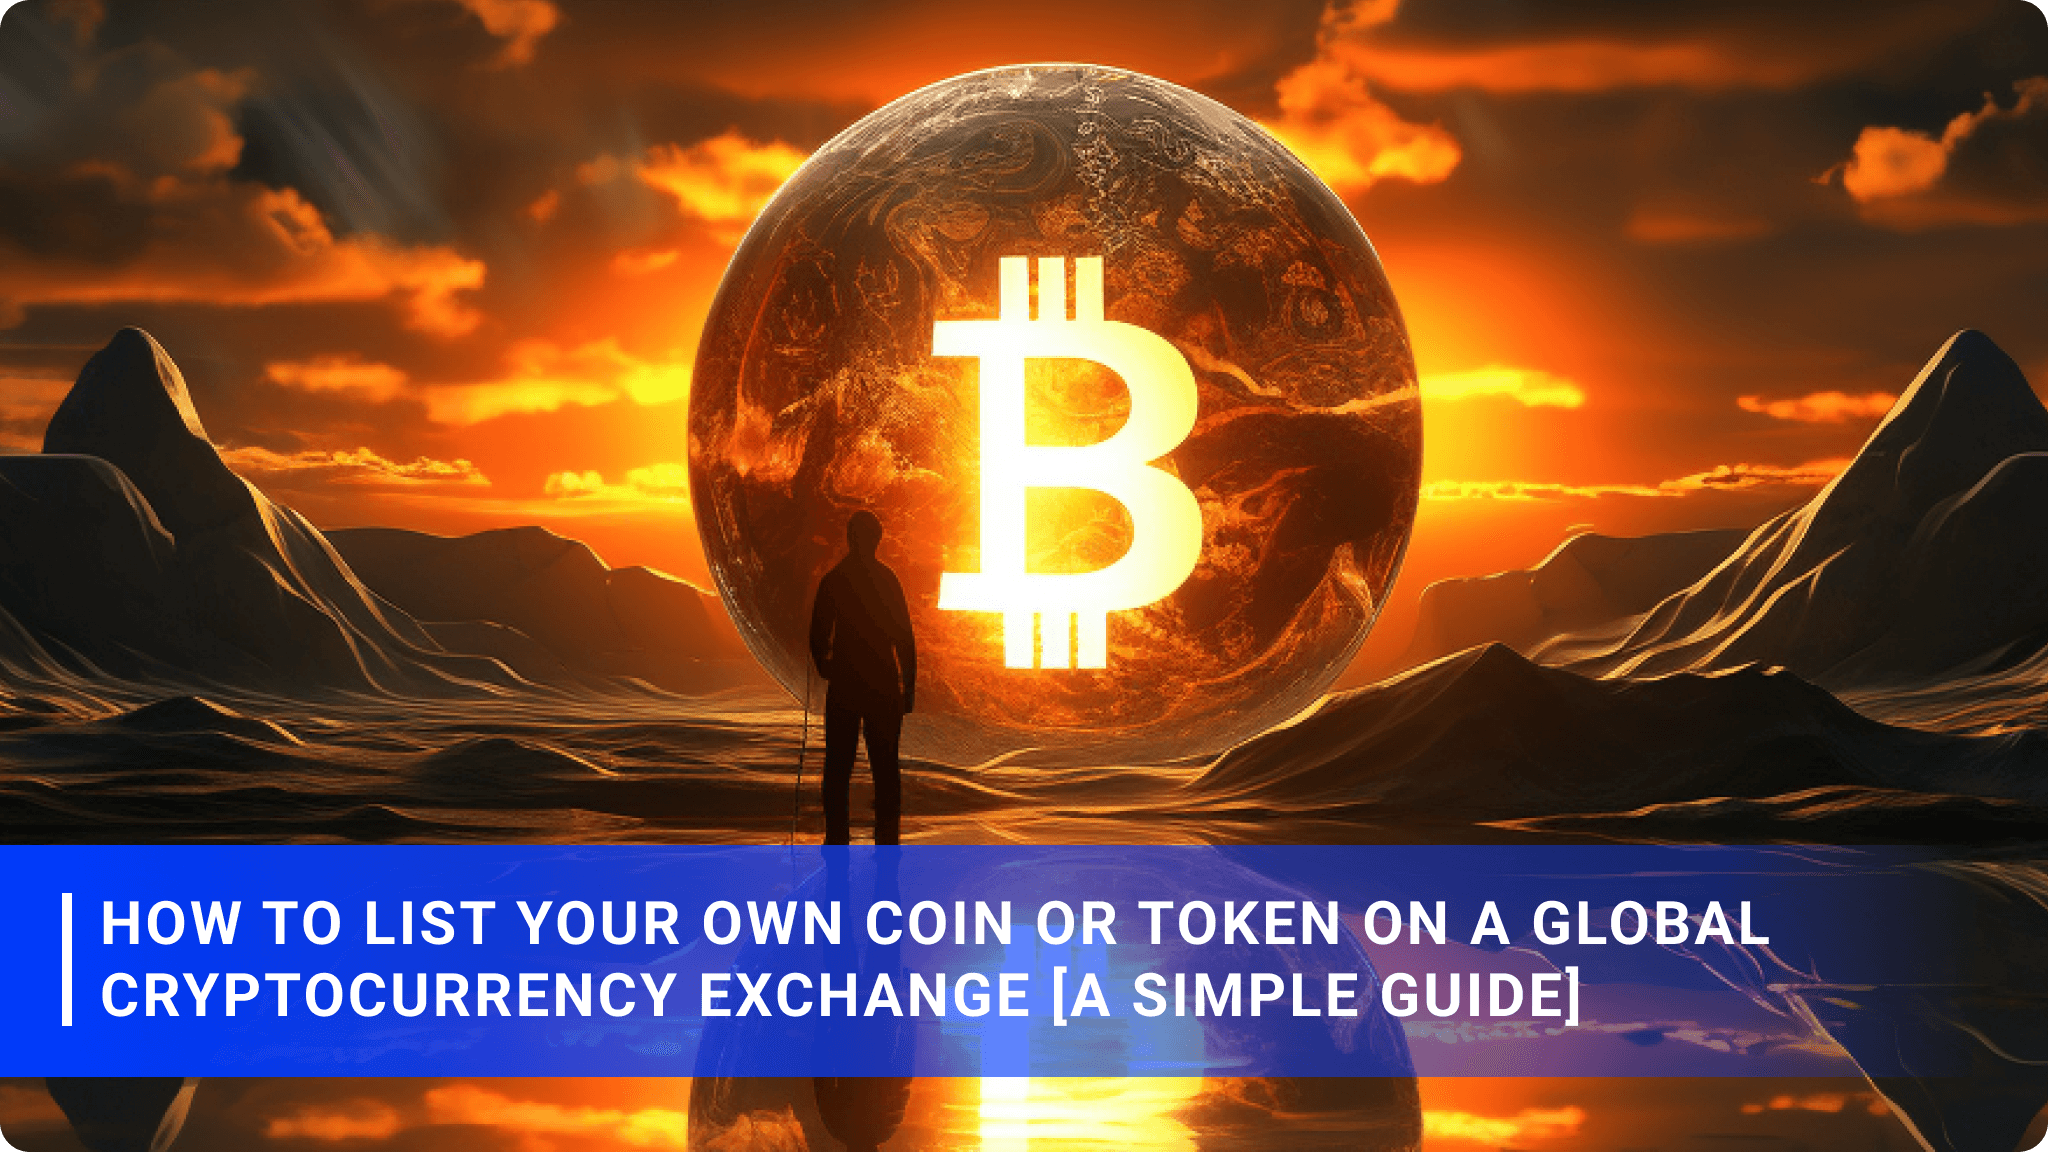 How to List Your Own Coin or Token on a Global Cryptocurrency Exchange [A Simple Guide]